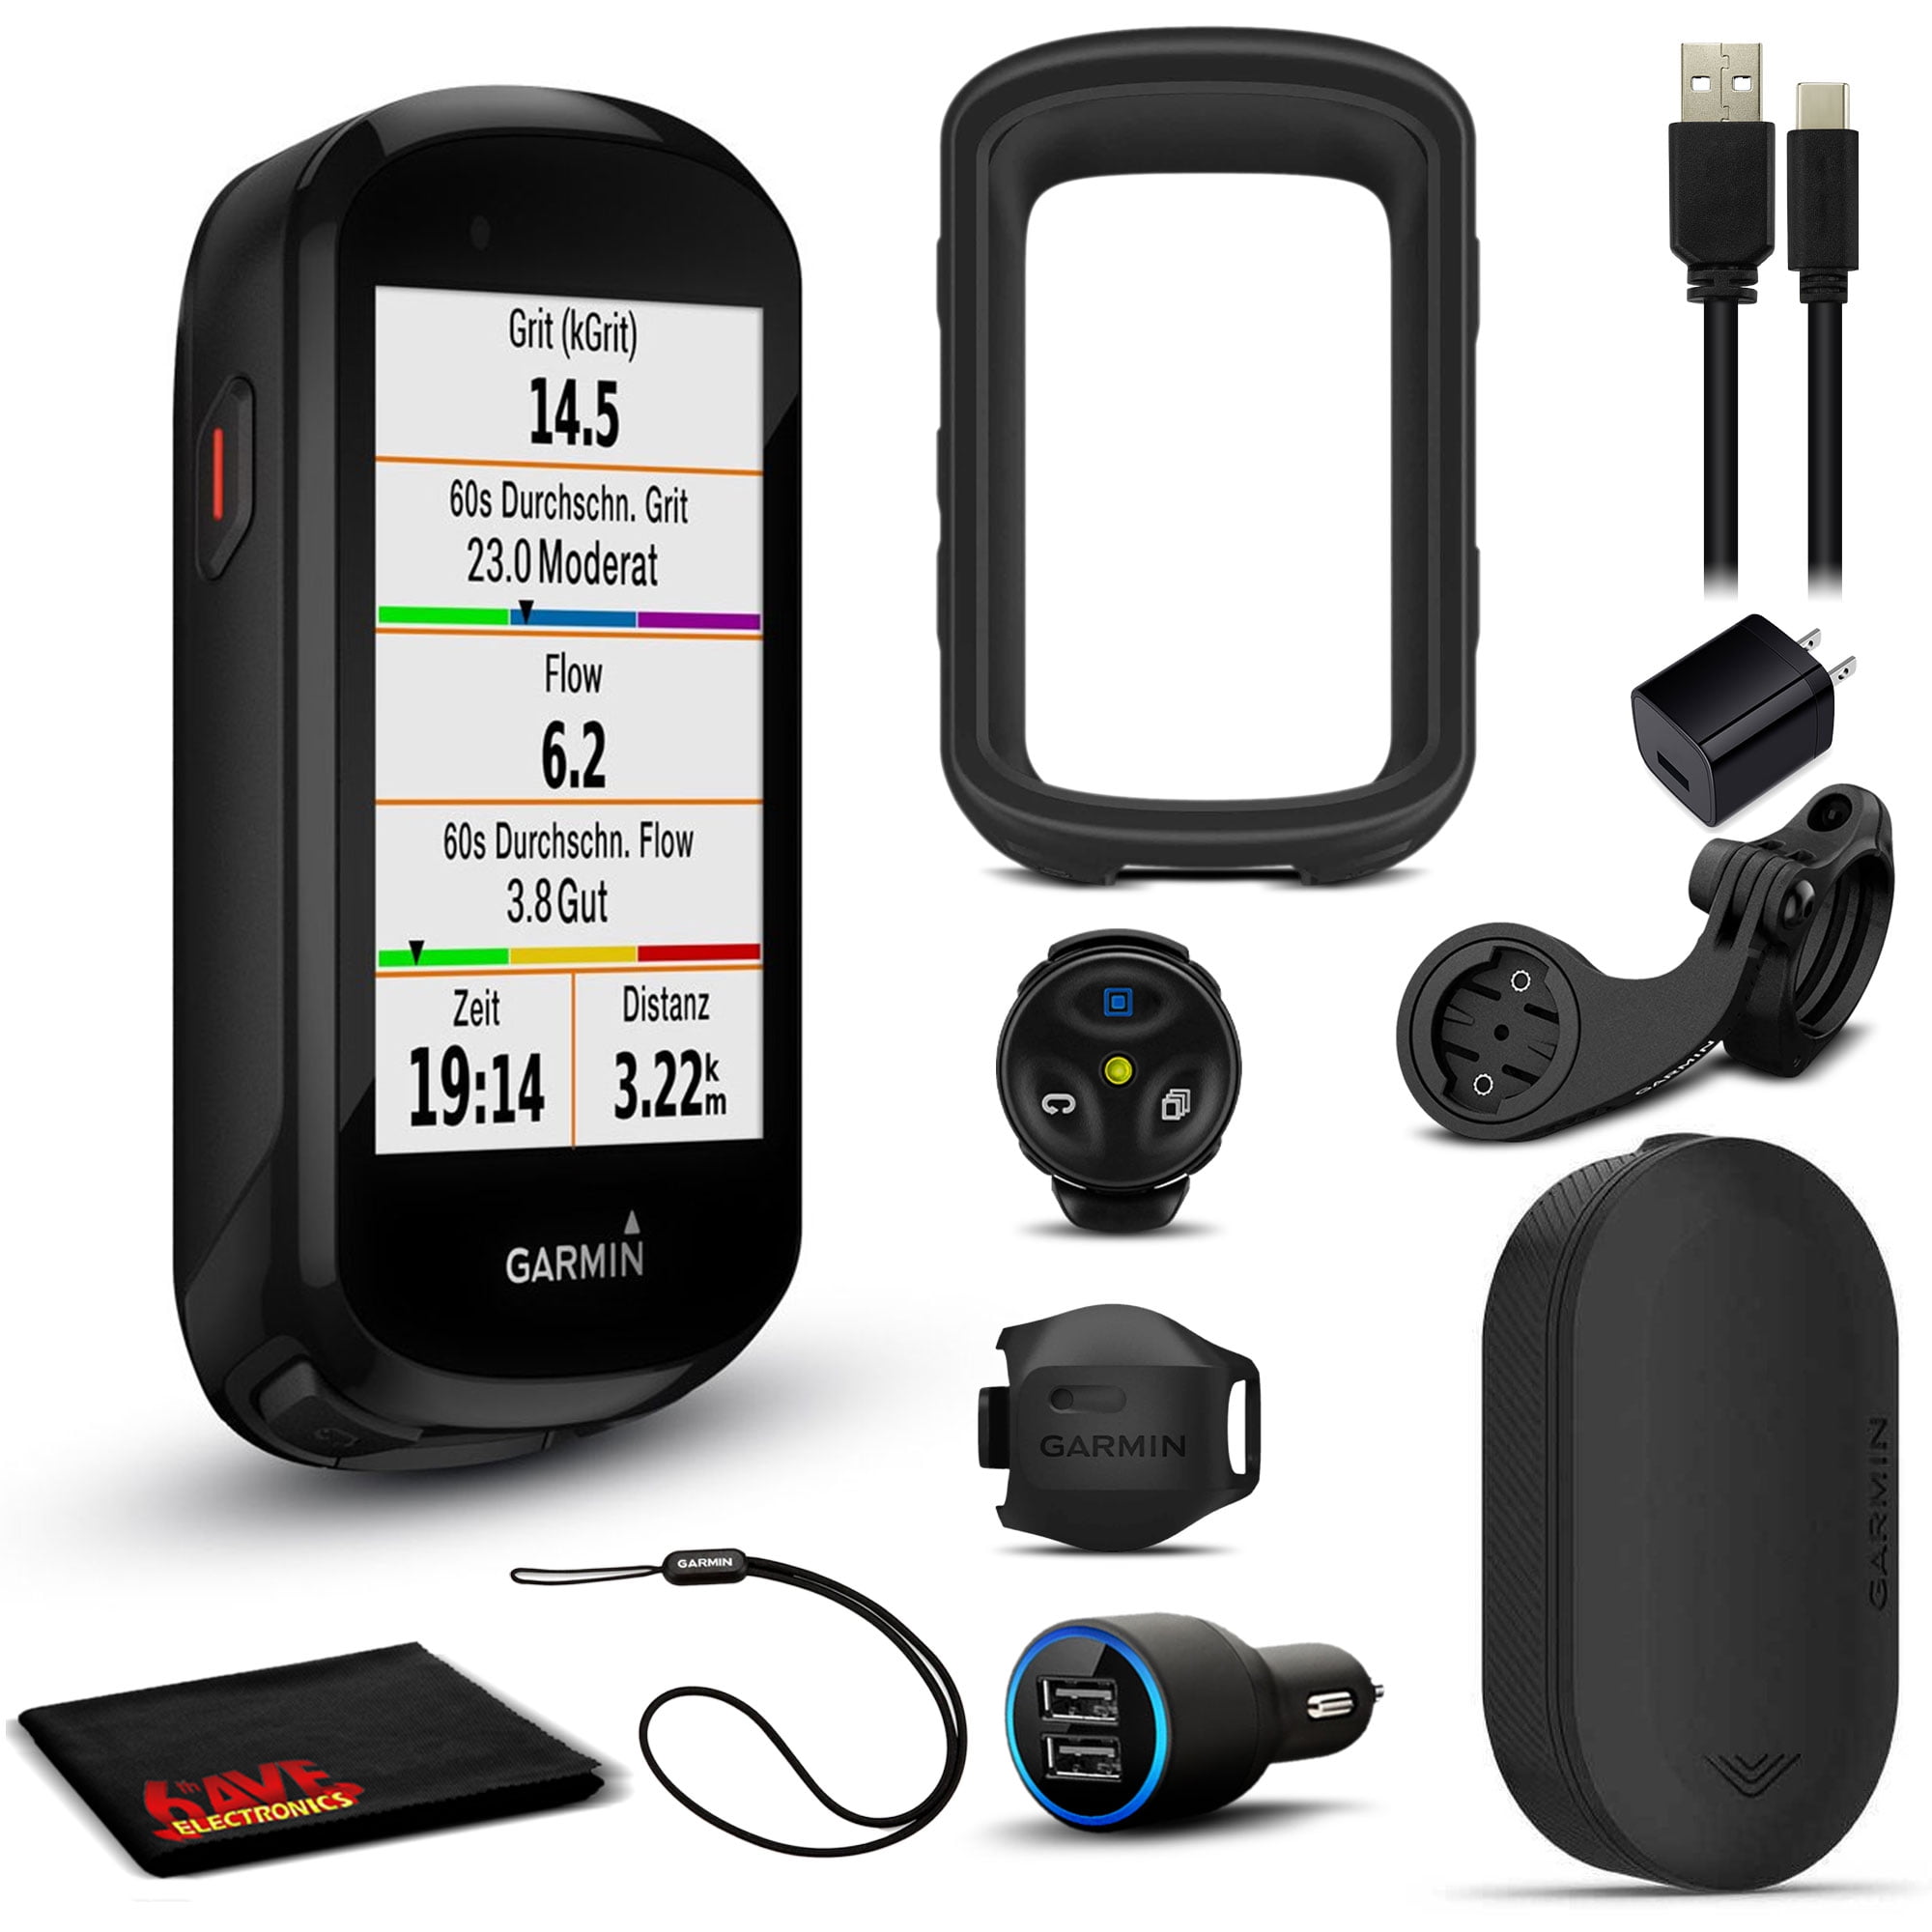 Garmin Edge Mountain Bundle with Varia Rearview Radar, Extra Charging Adapters, and 6Ave Cleaning - Walmart.com